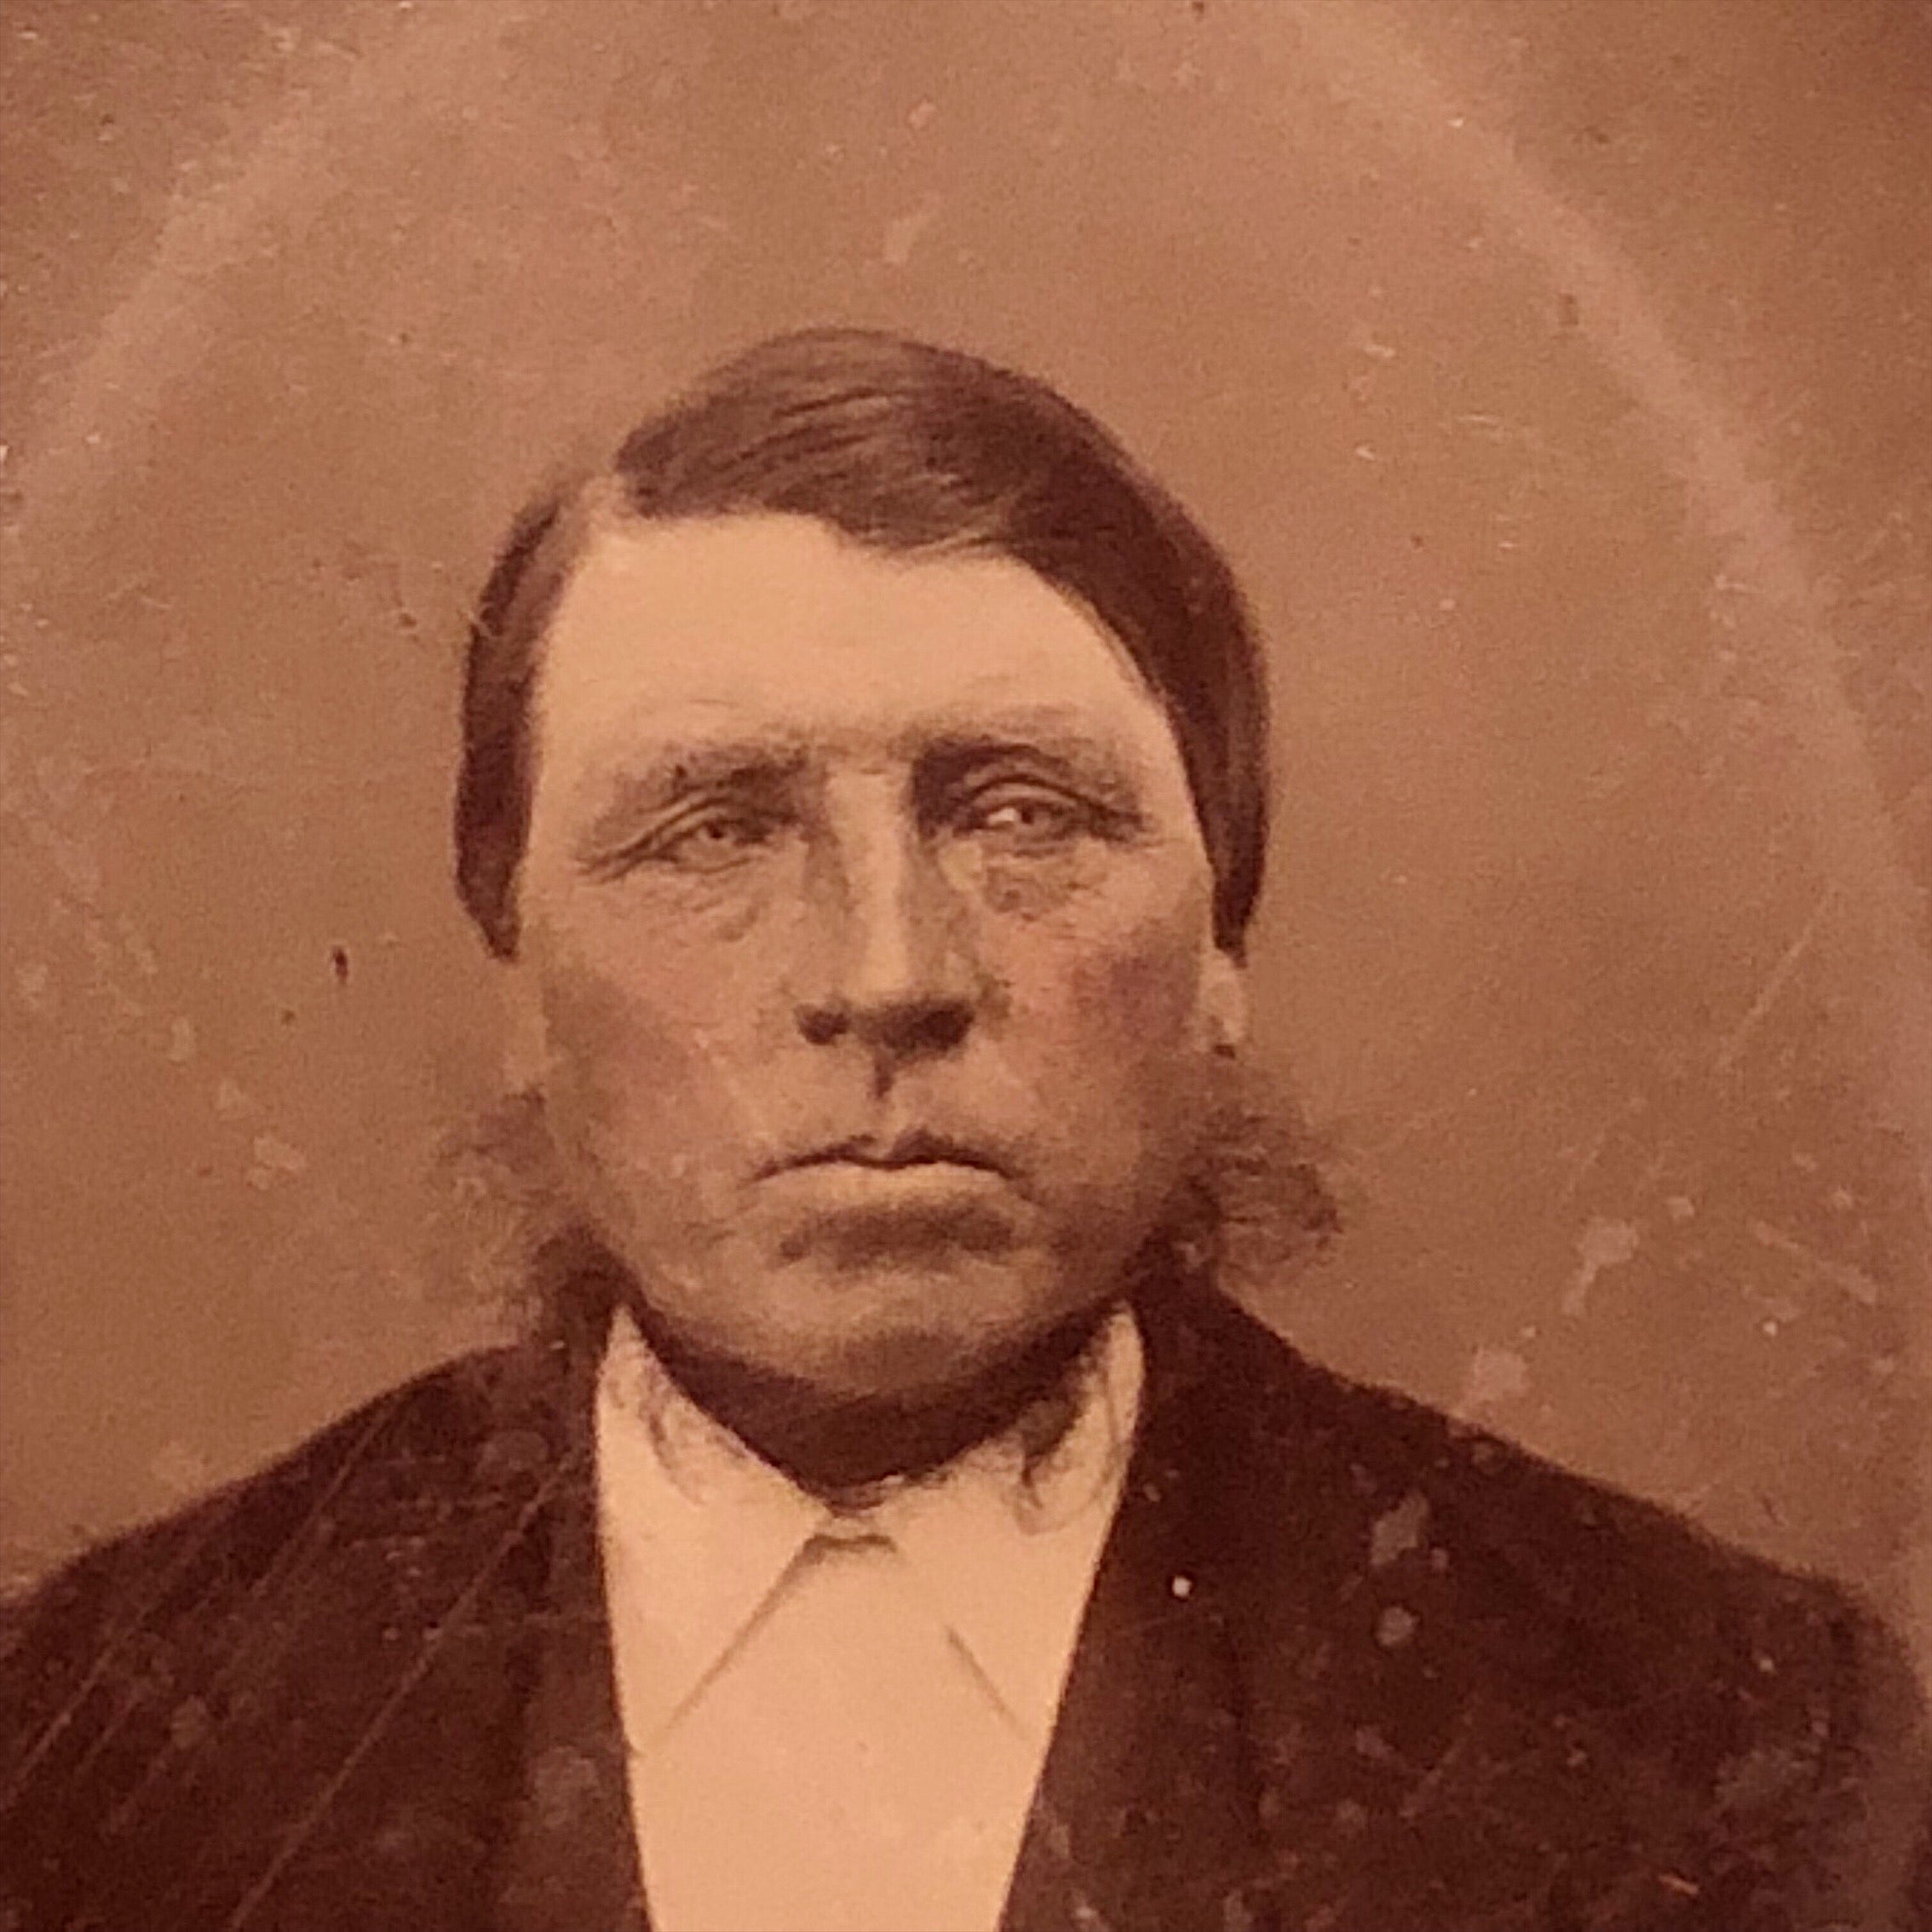 Antique Tintype of Creepy Dude with Dead Eyes with Hairy Neck Monster - Late 1800s